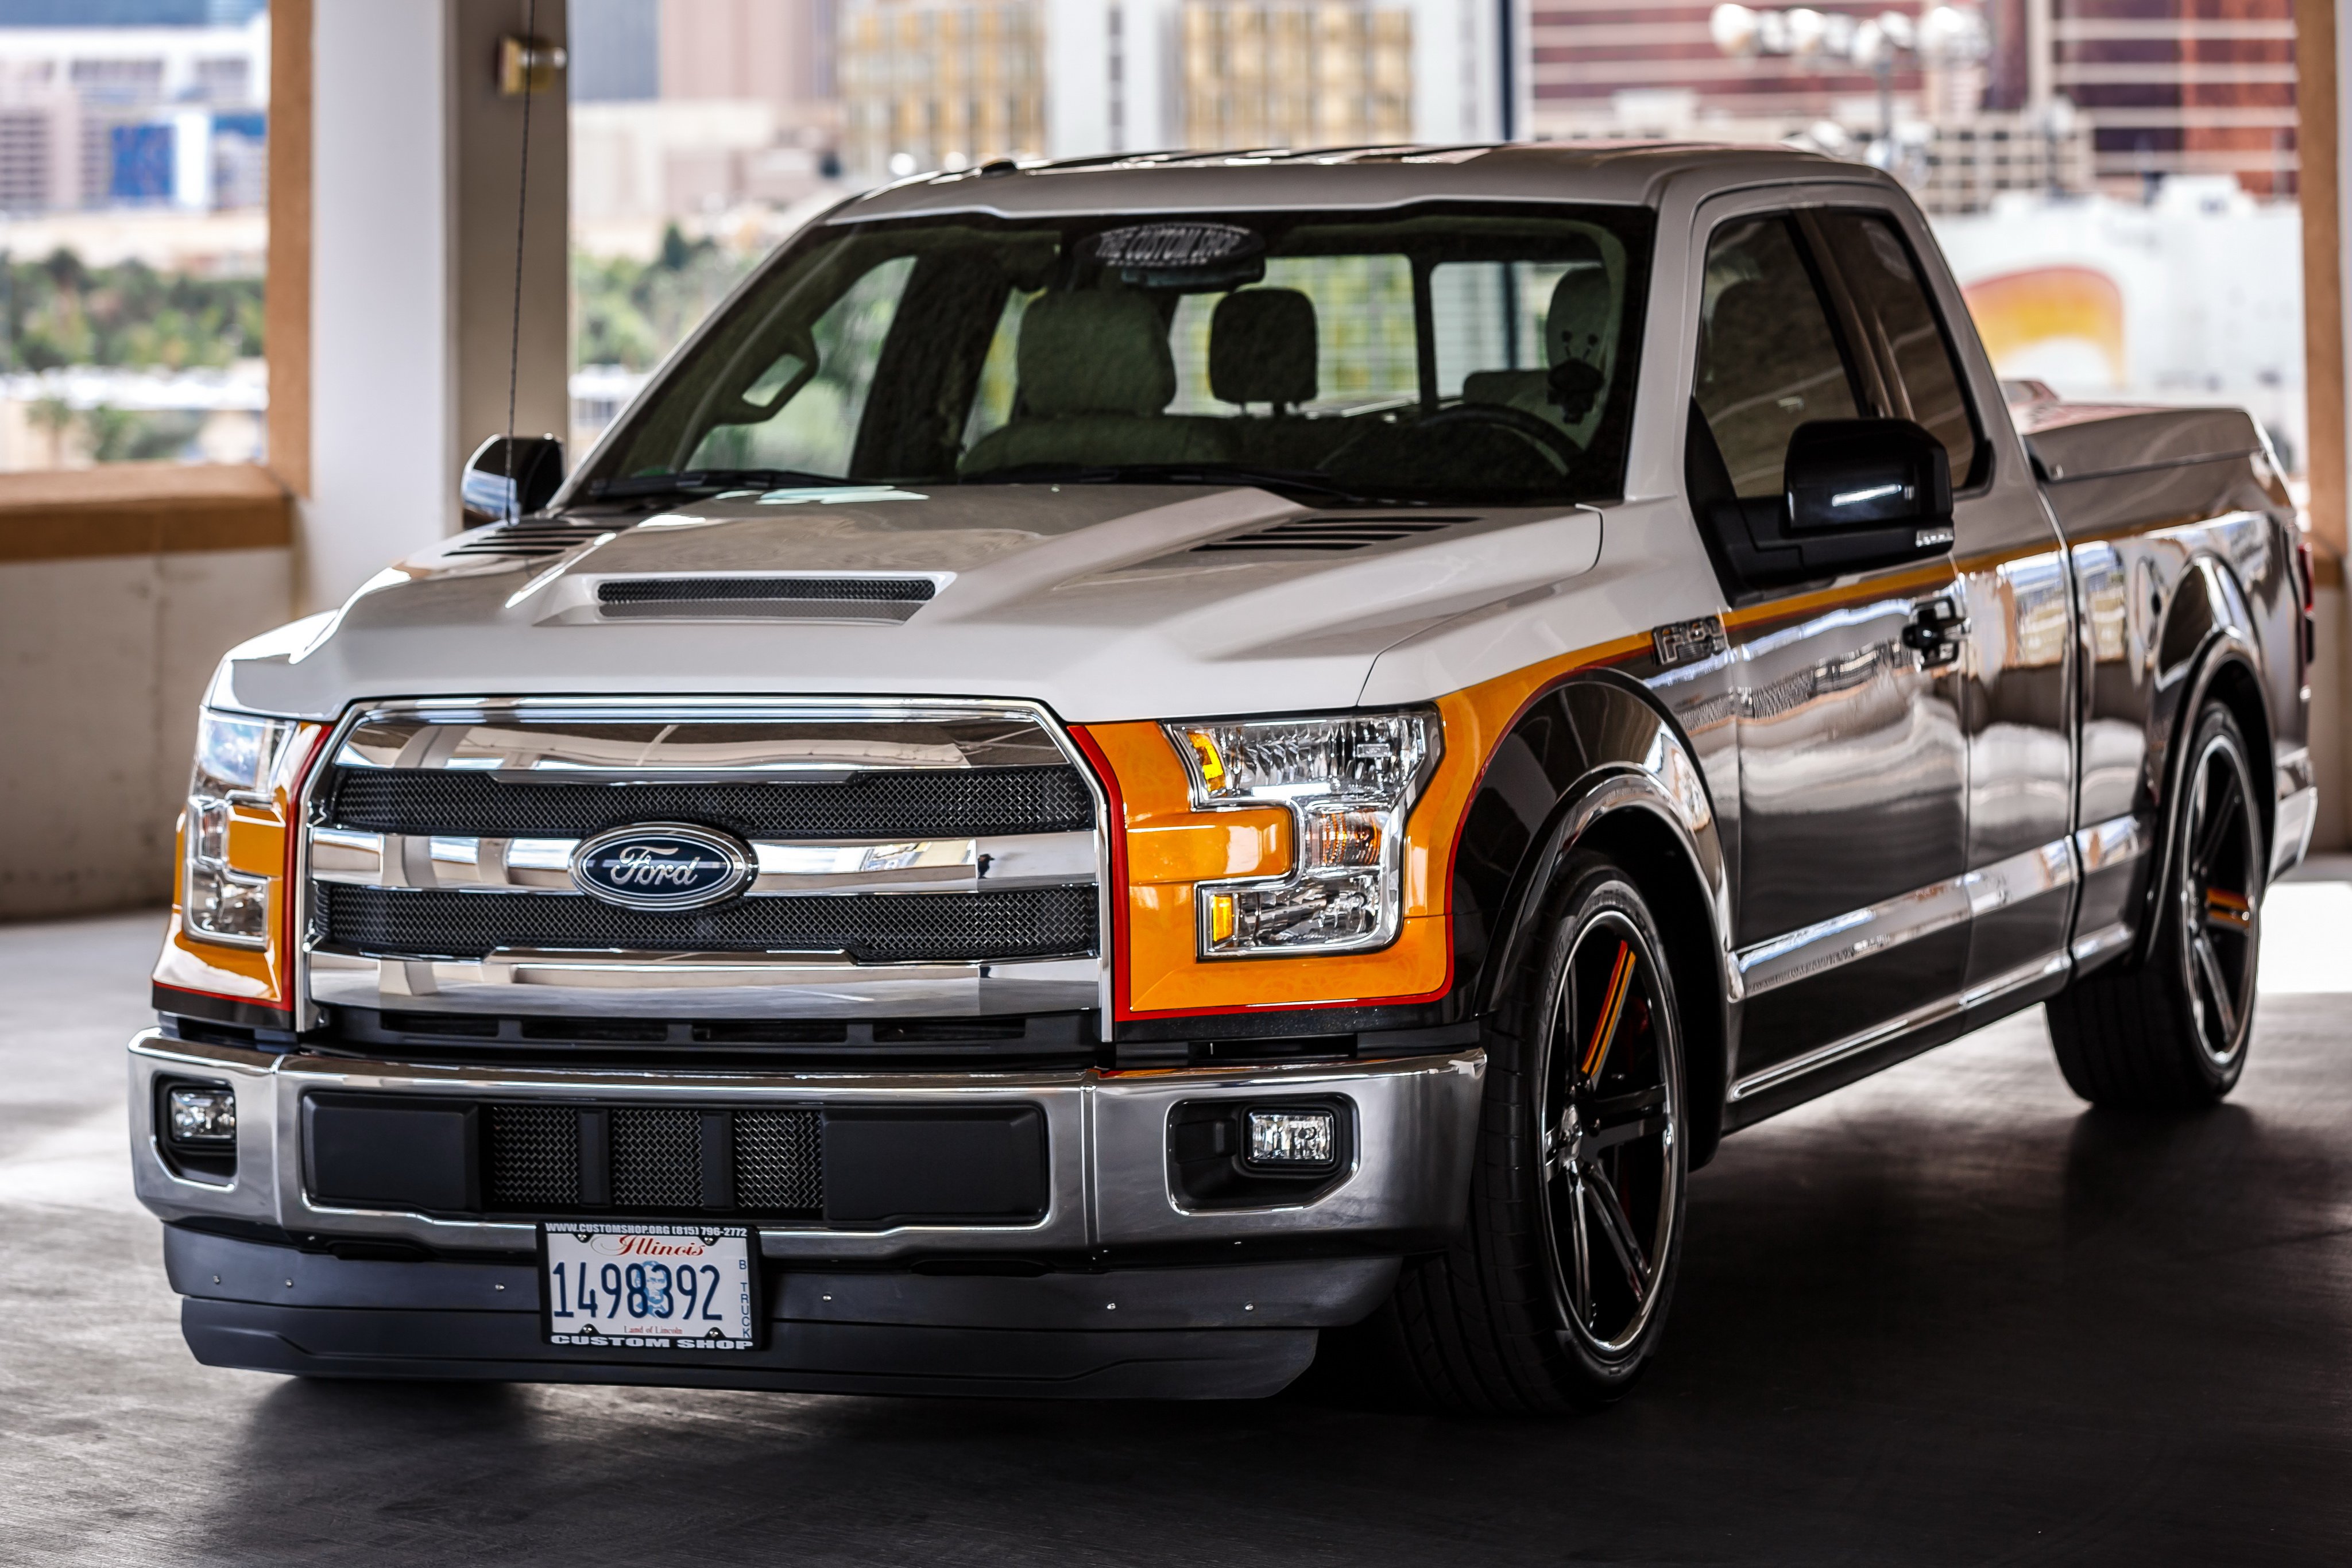 2015, Custom shop, Ford, F 150, Lariat, Tuning, Muscle, Pickup Wallpaper